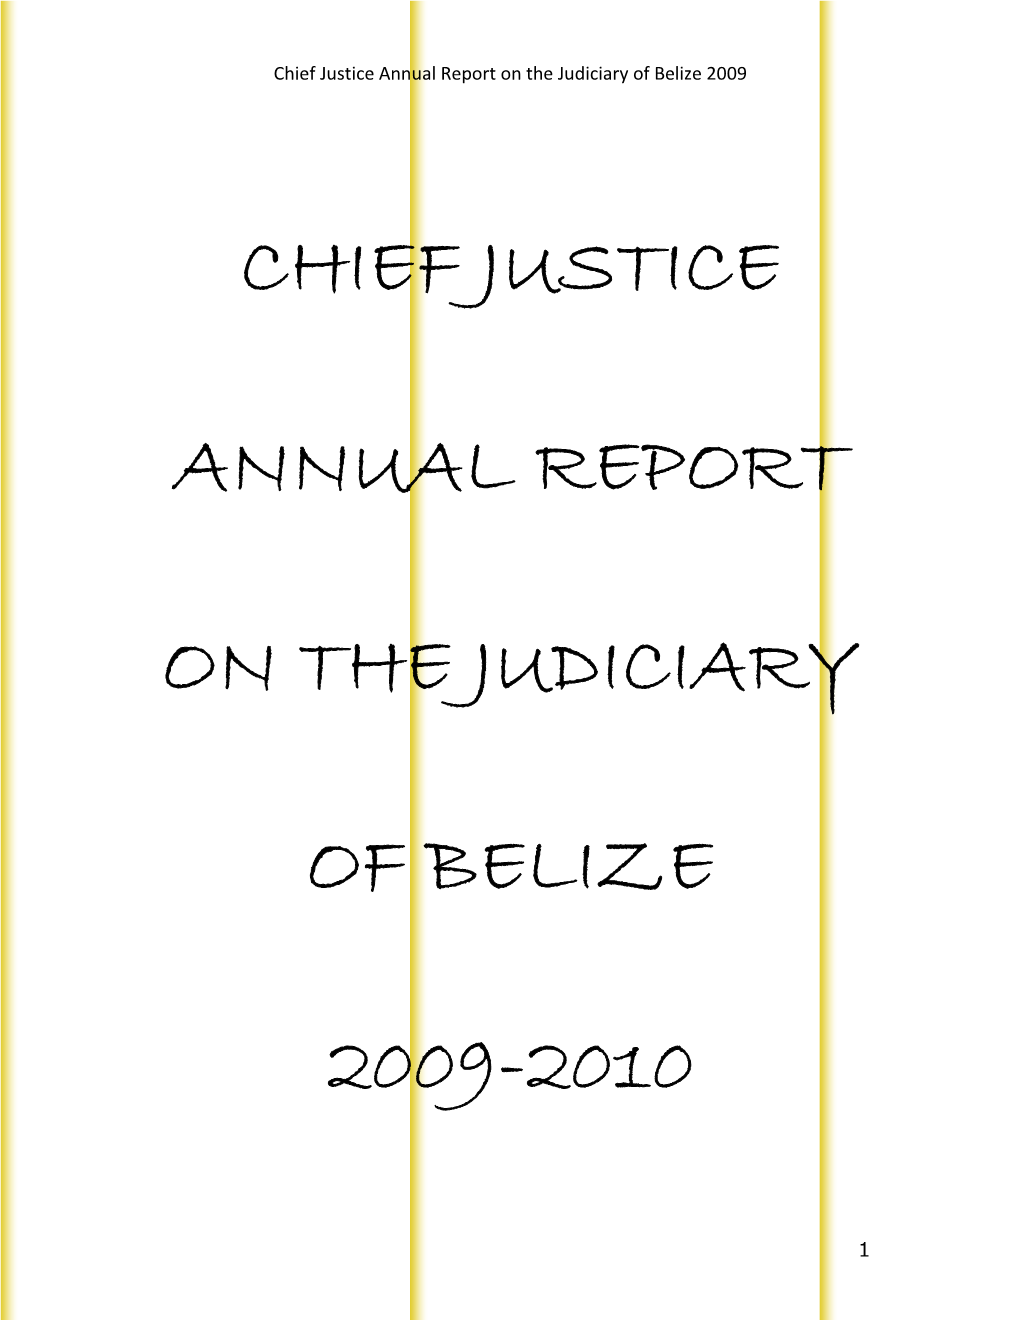 Chief Justice Annual Report on the Judiciary of Belize 2009